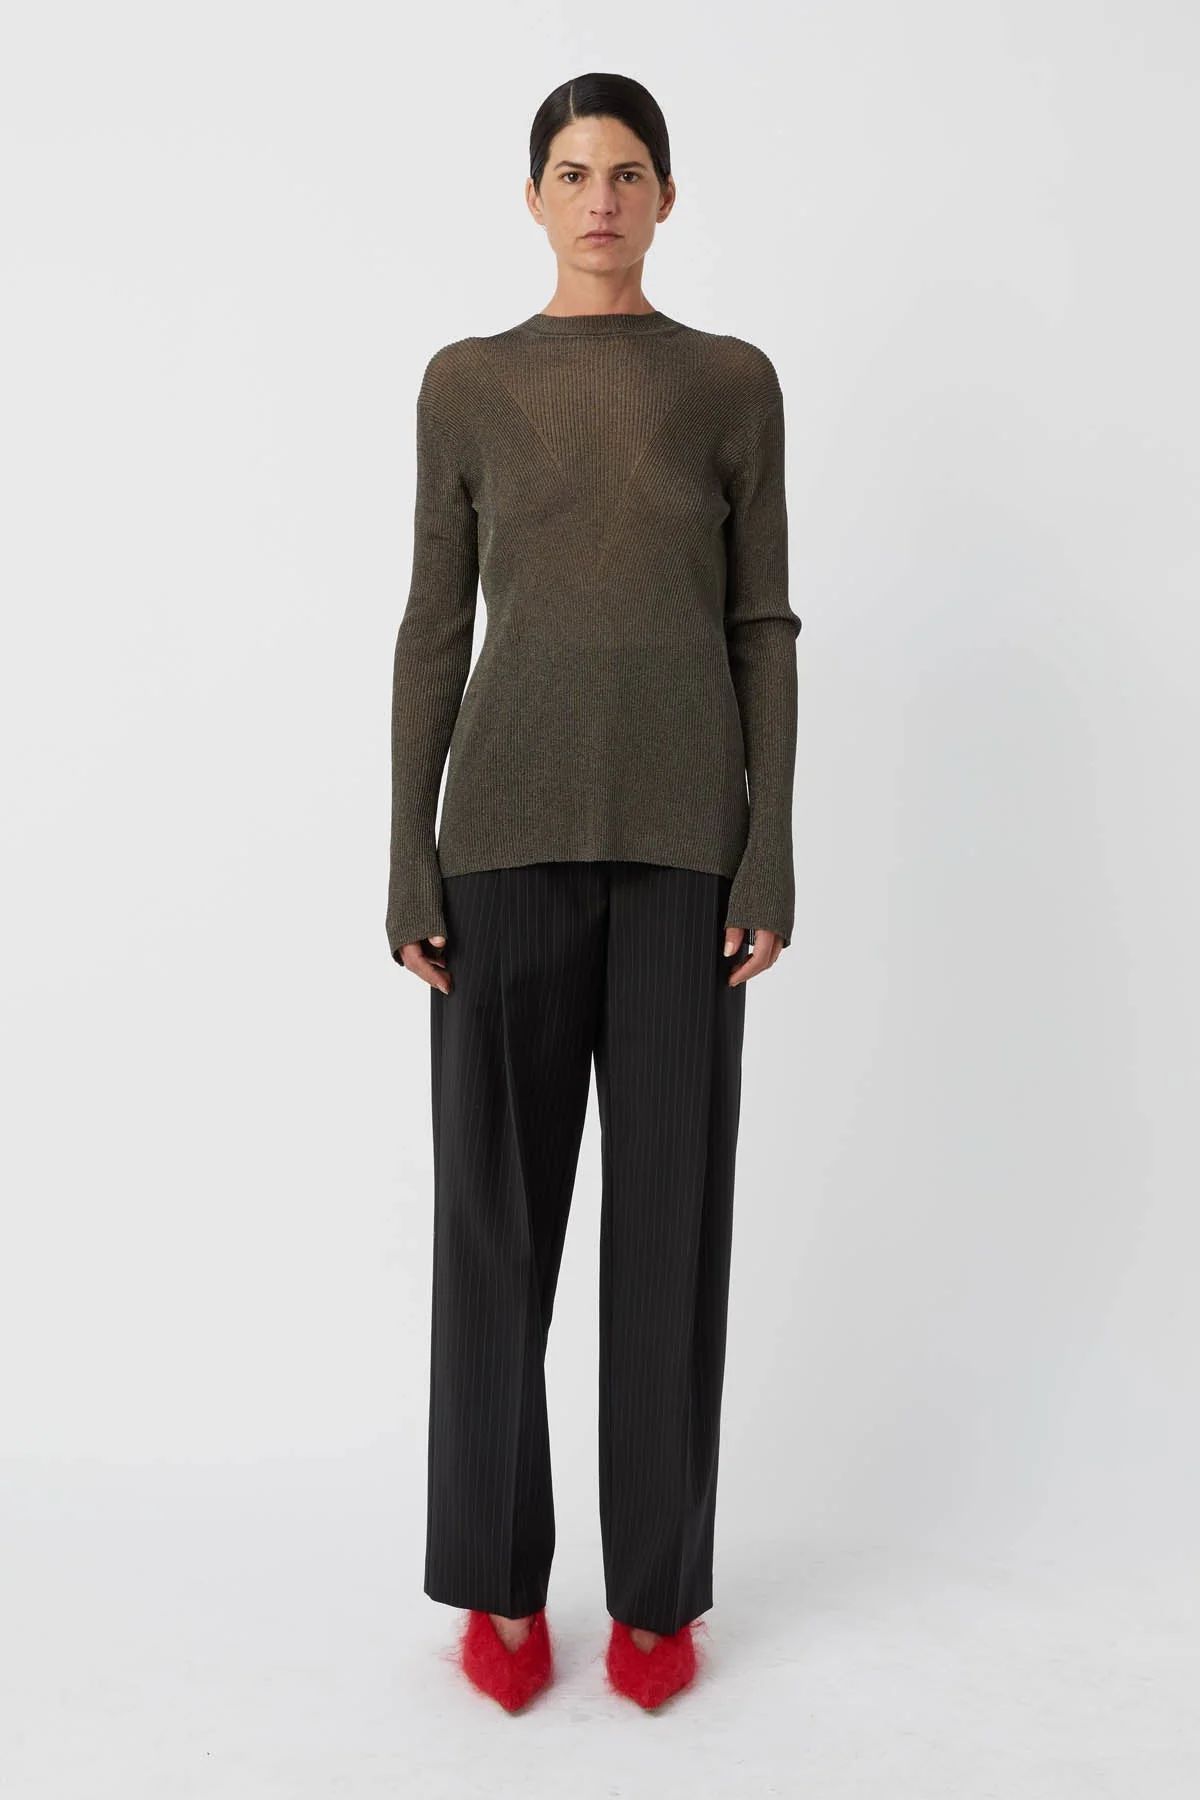 CAMILLA AND MARC Neveah Long Sleeved Top in Gunmetal Grey. | Camilla and Marc